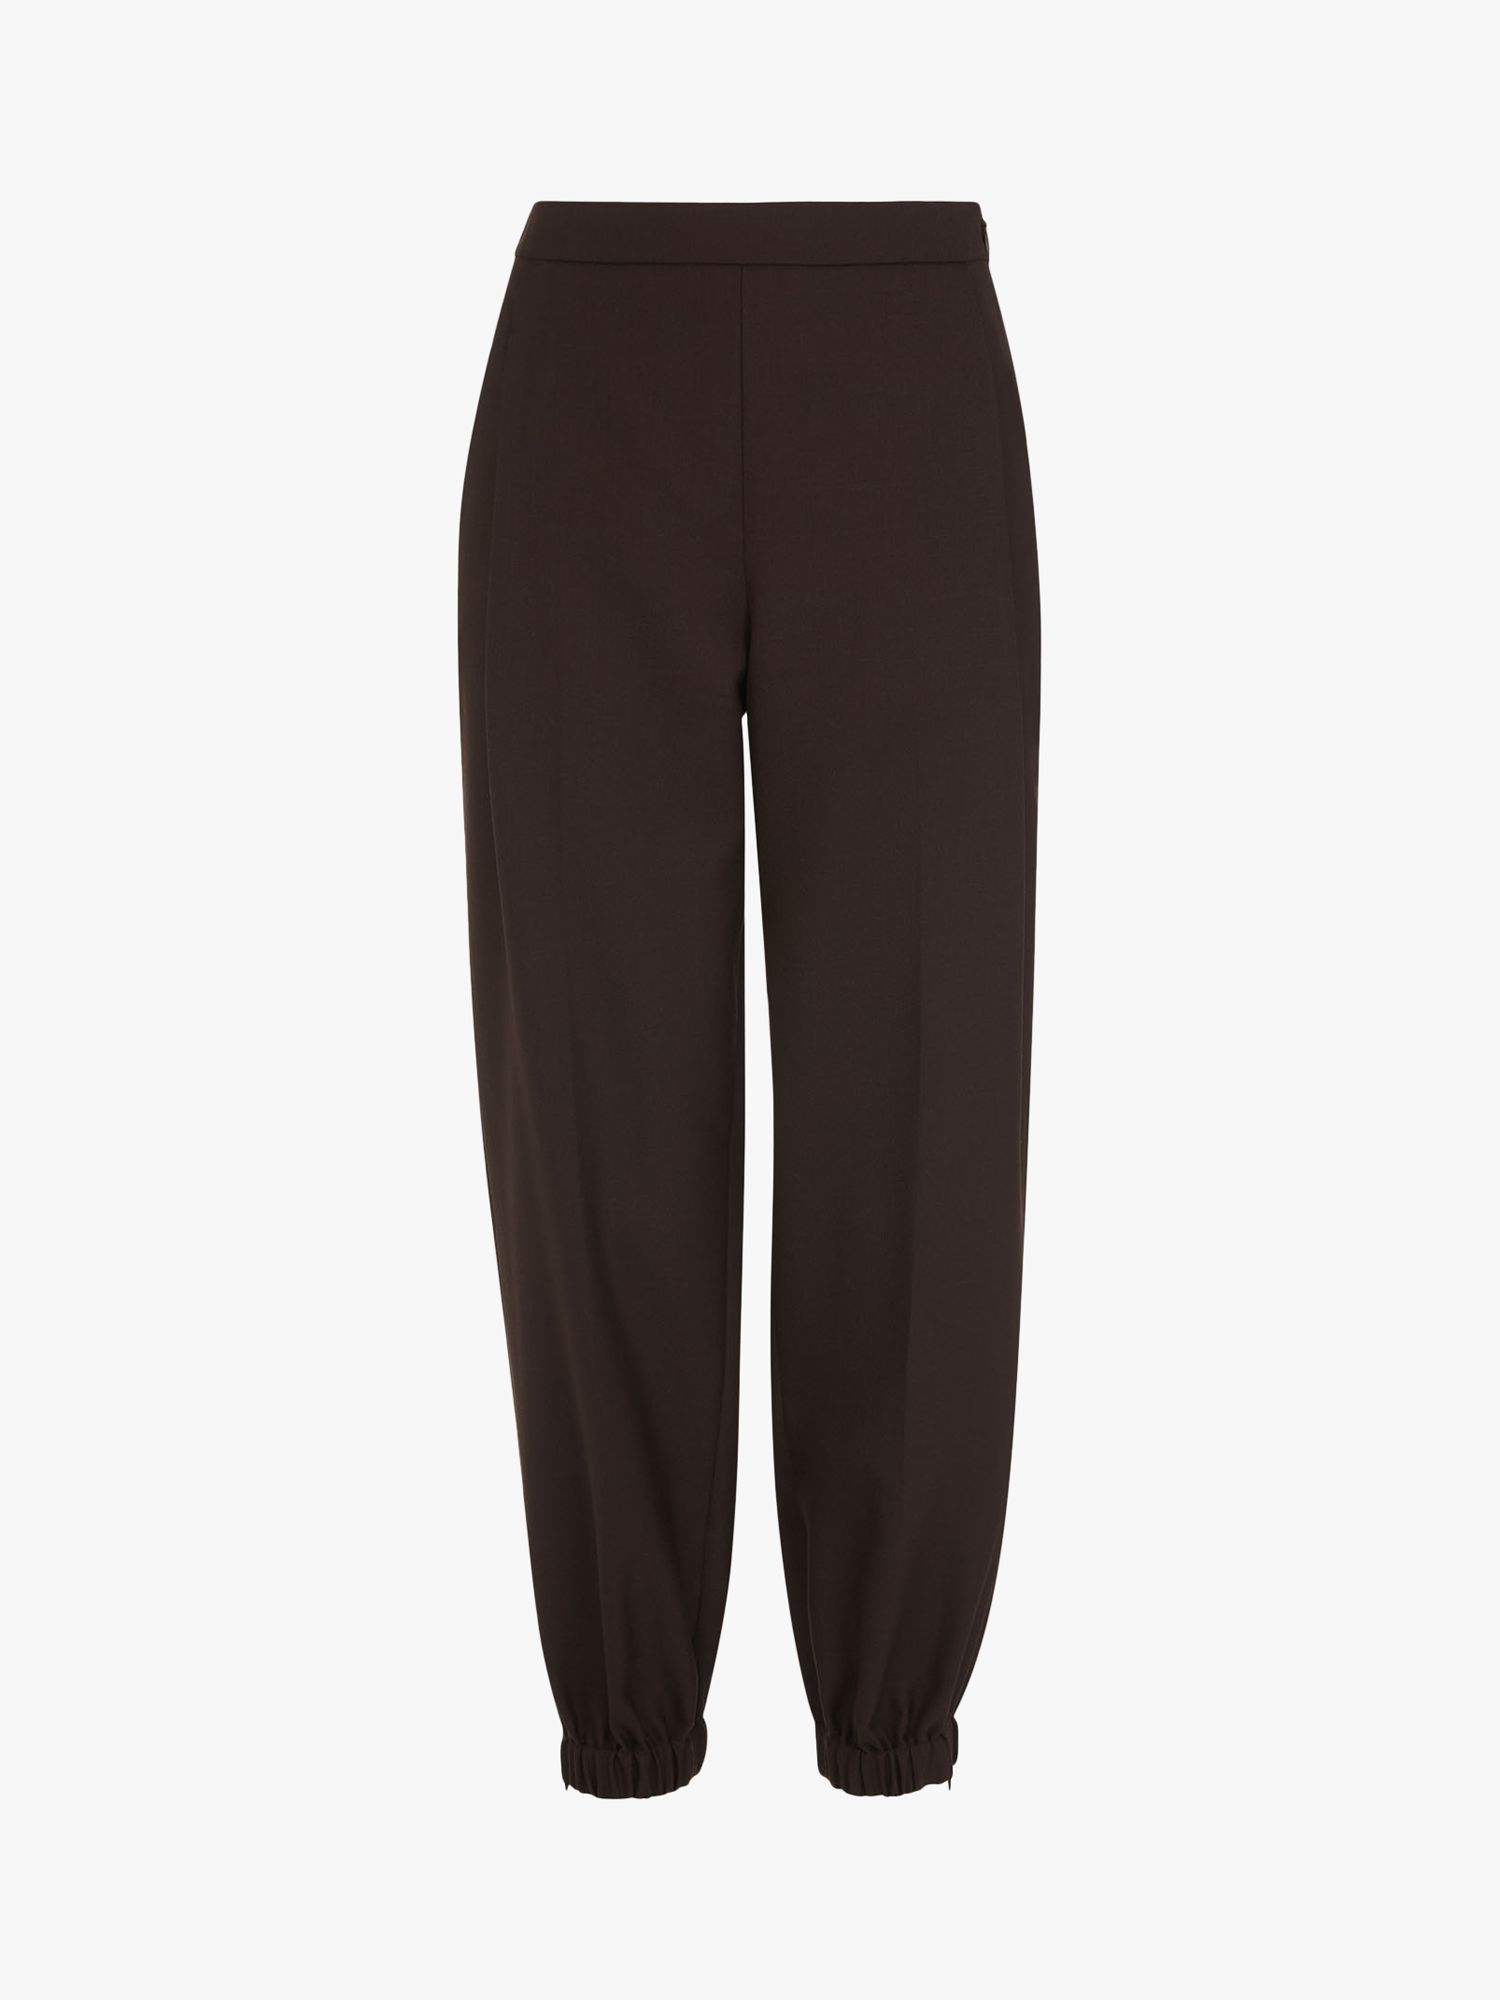 Whistles Mia Stretch Waist Trousers, Chocolate at John Lewis & Partners